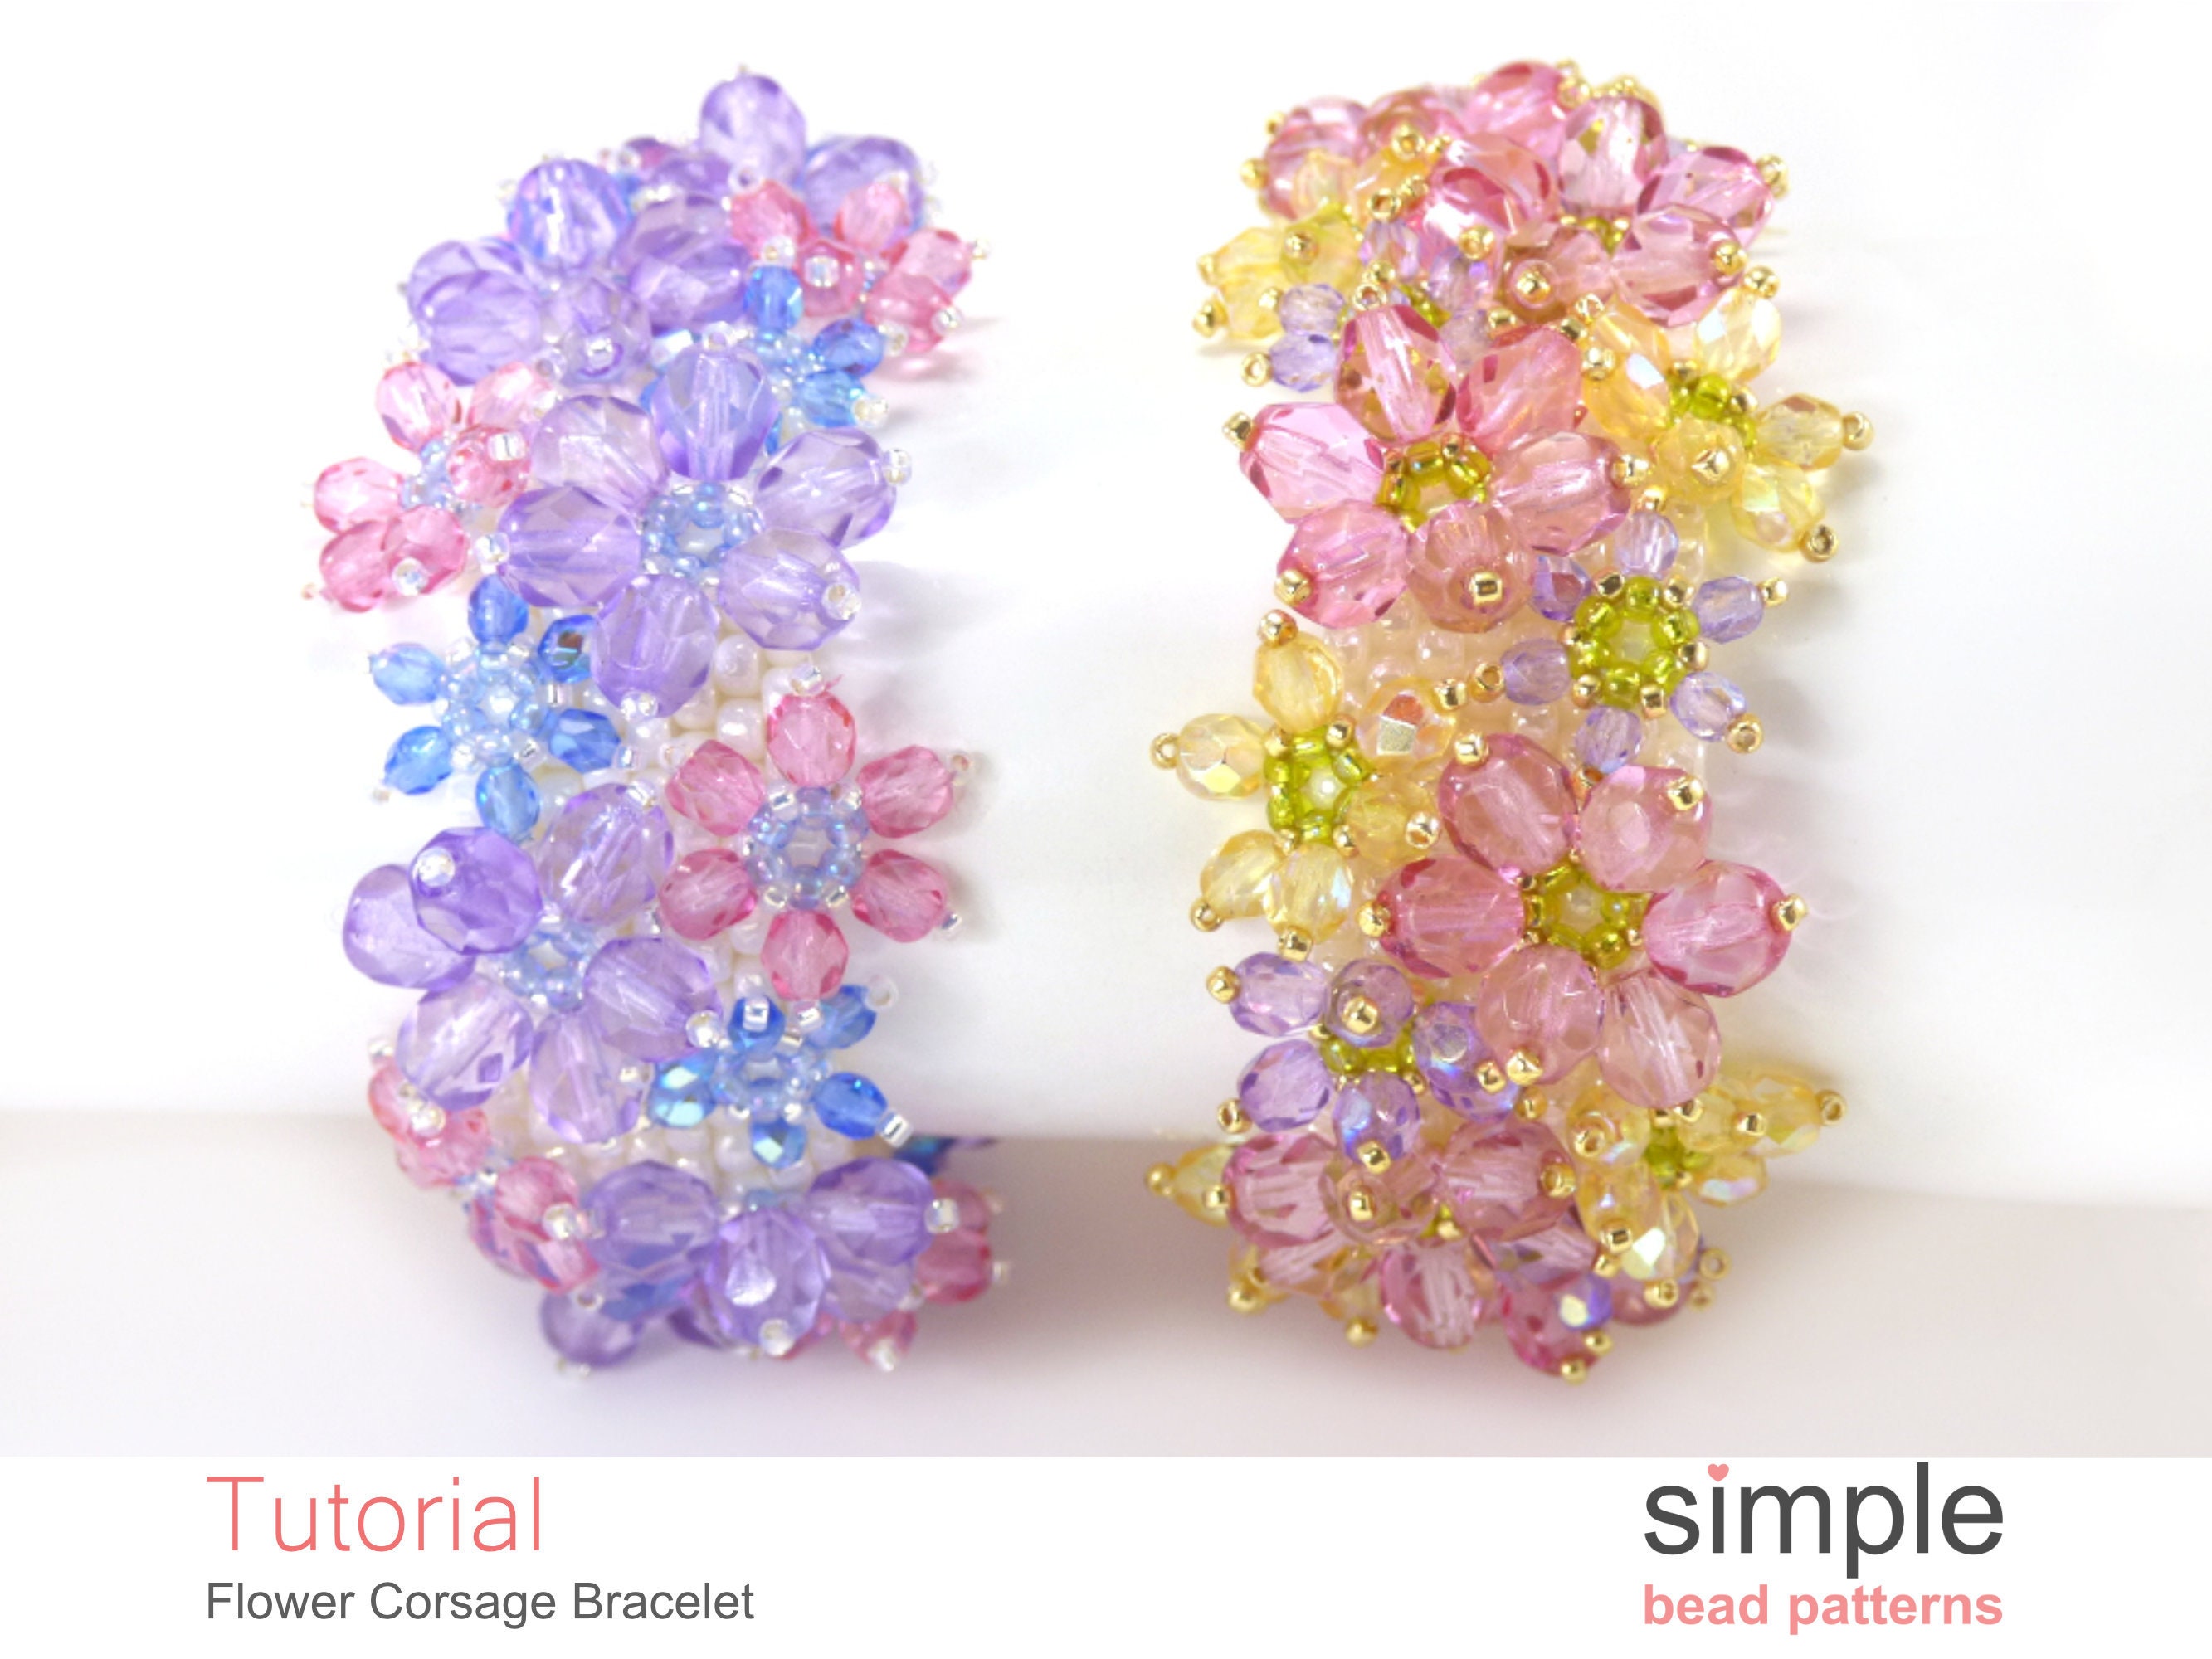 Colorful Flowers Seed Beads Bracelet - Tutorial - YouTube